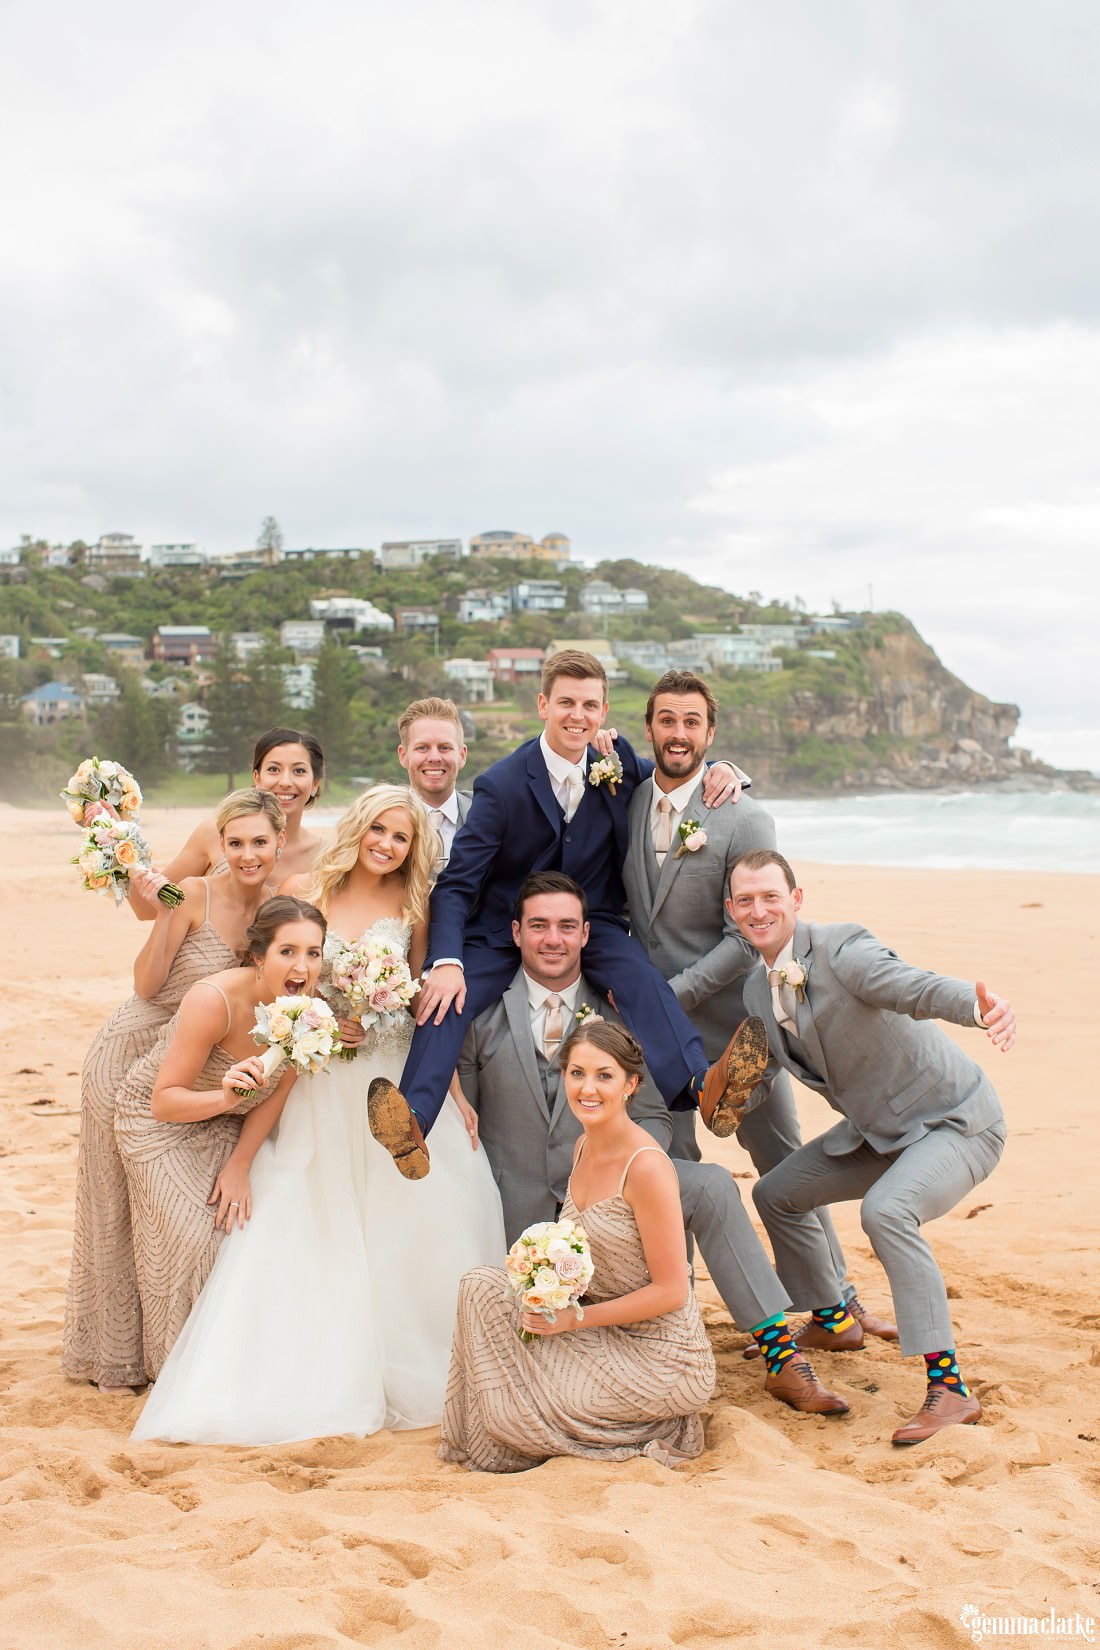 A wedding party posing together on Whale Beach, the groom sitting on the shoulders of his best man